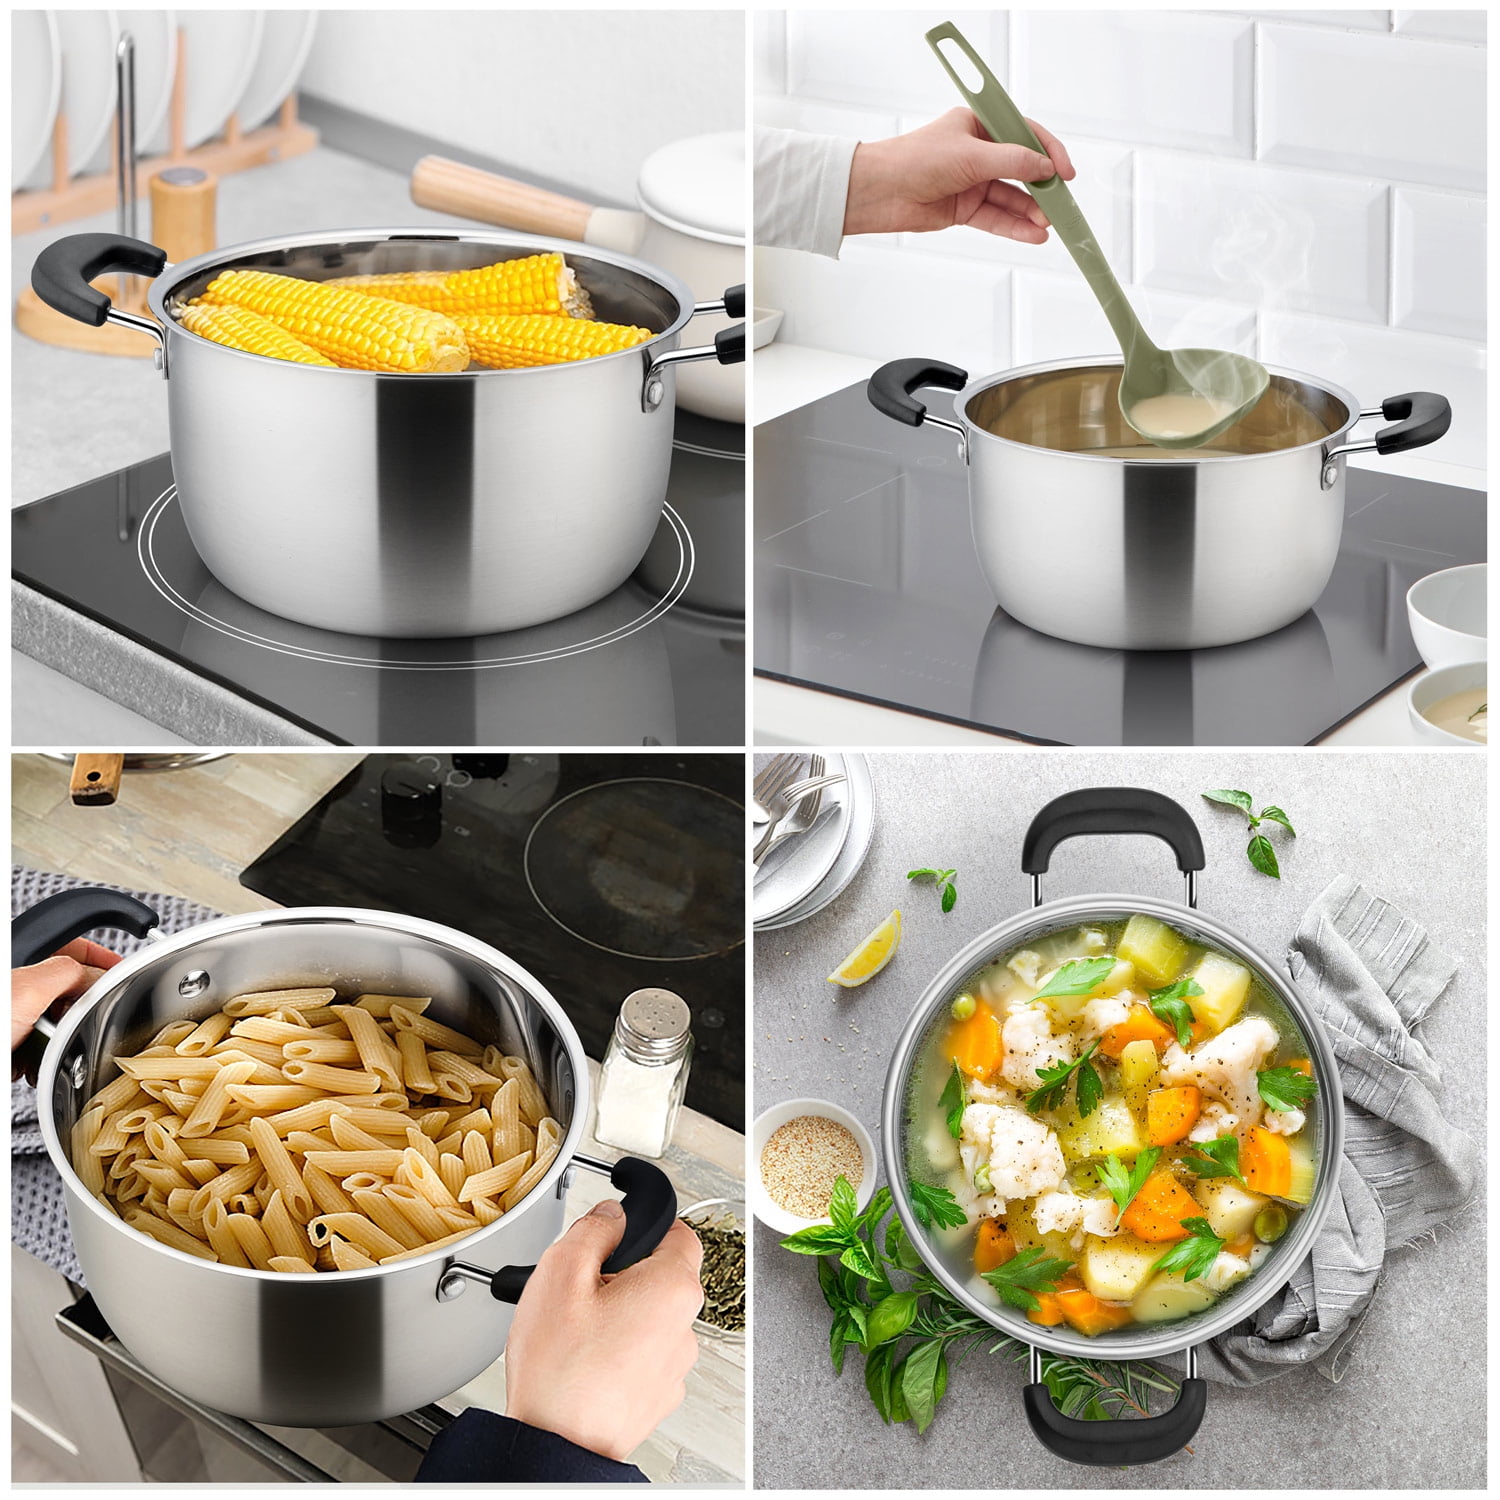 Walchoice 6 Quart Stockpot with Lid, Stainless Steel Pasta Soup Pot for Home Restaurant Hotel, Heat-proof & Double Handles, Size: 9 x 4.75, Clear